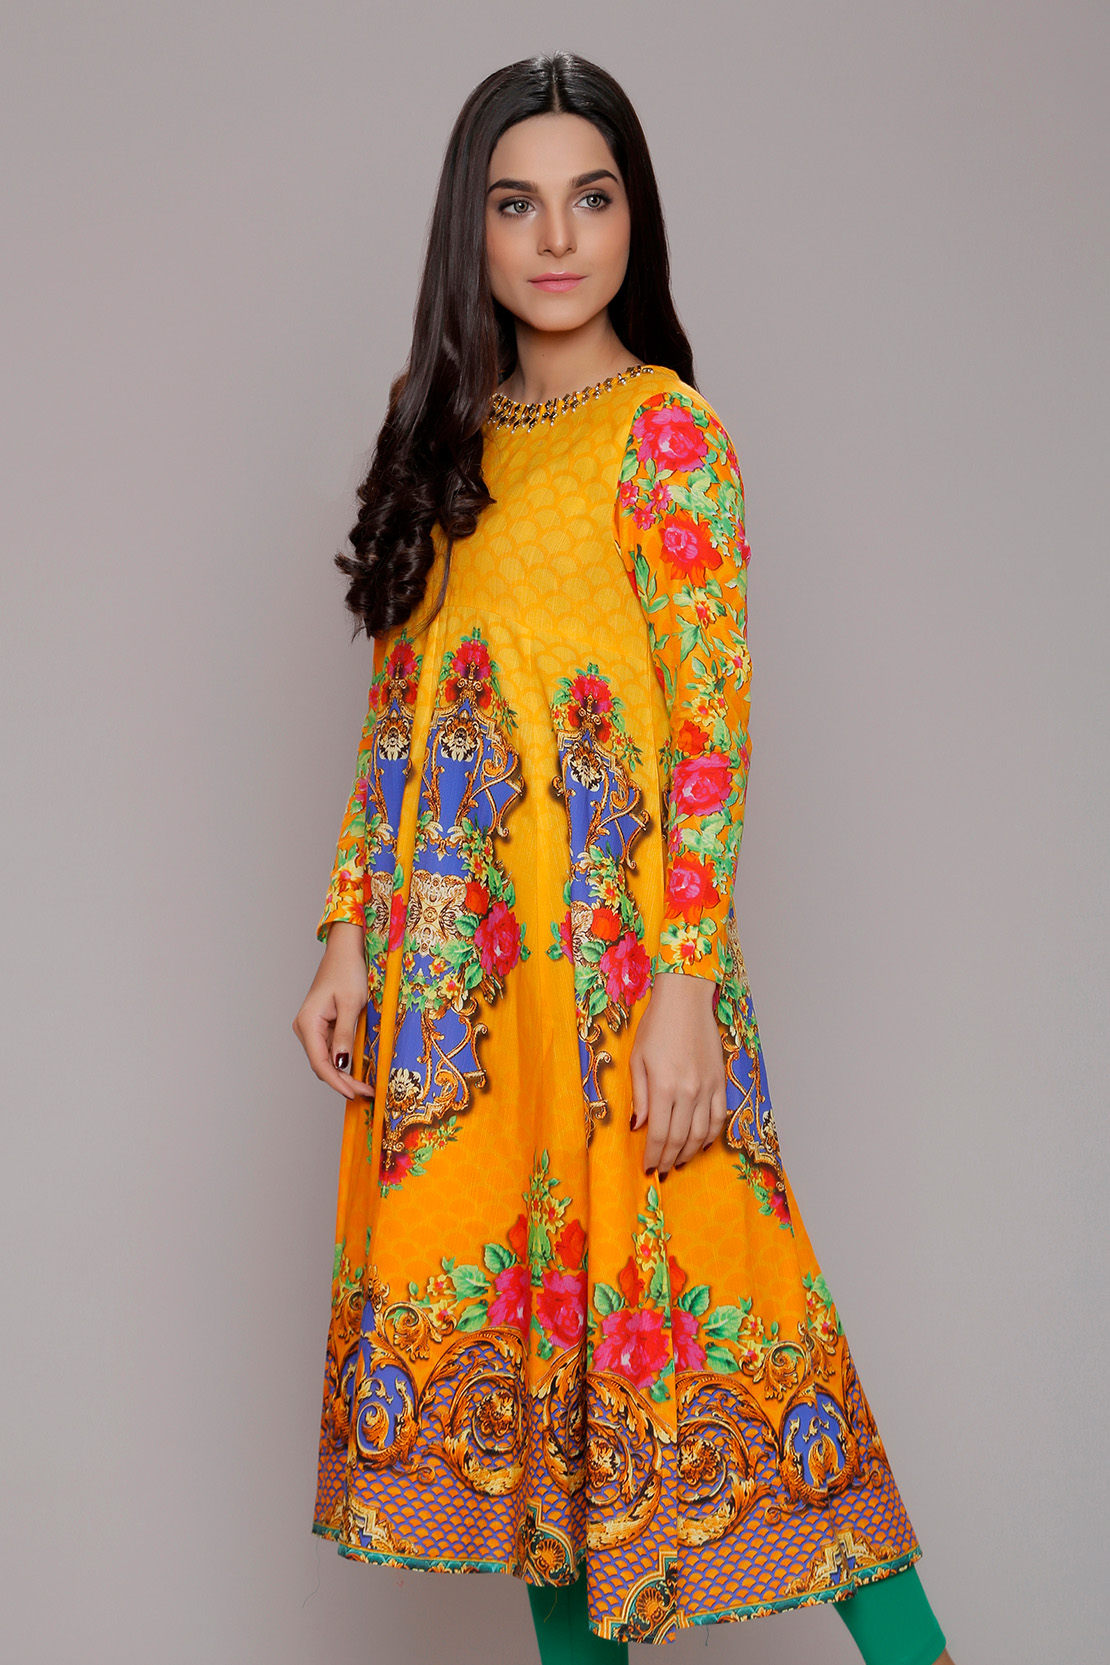 Funky yellow printed rady to wear top by Rang ja collection 2018 Funky yellow printed rady to wear top by Rang ja collection 2018 